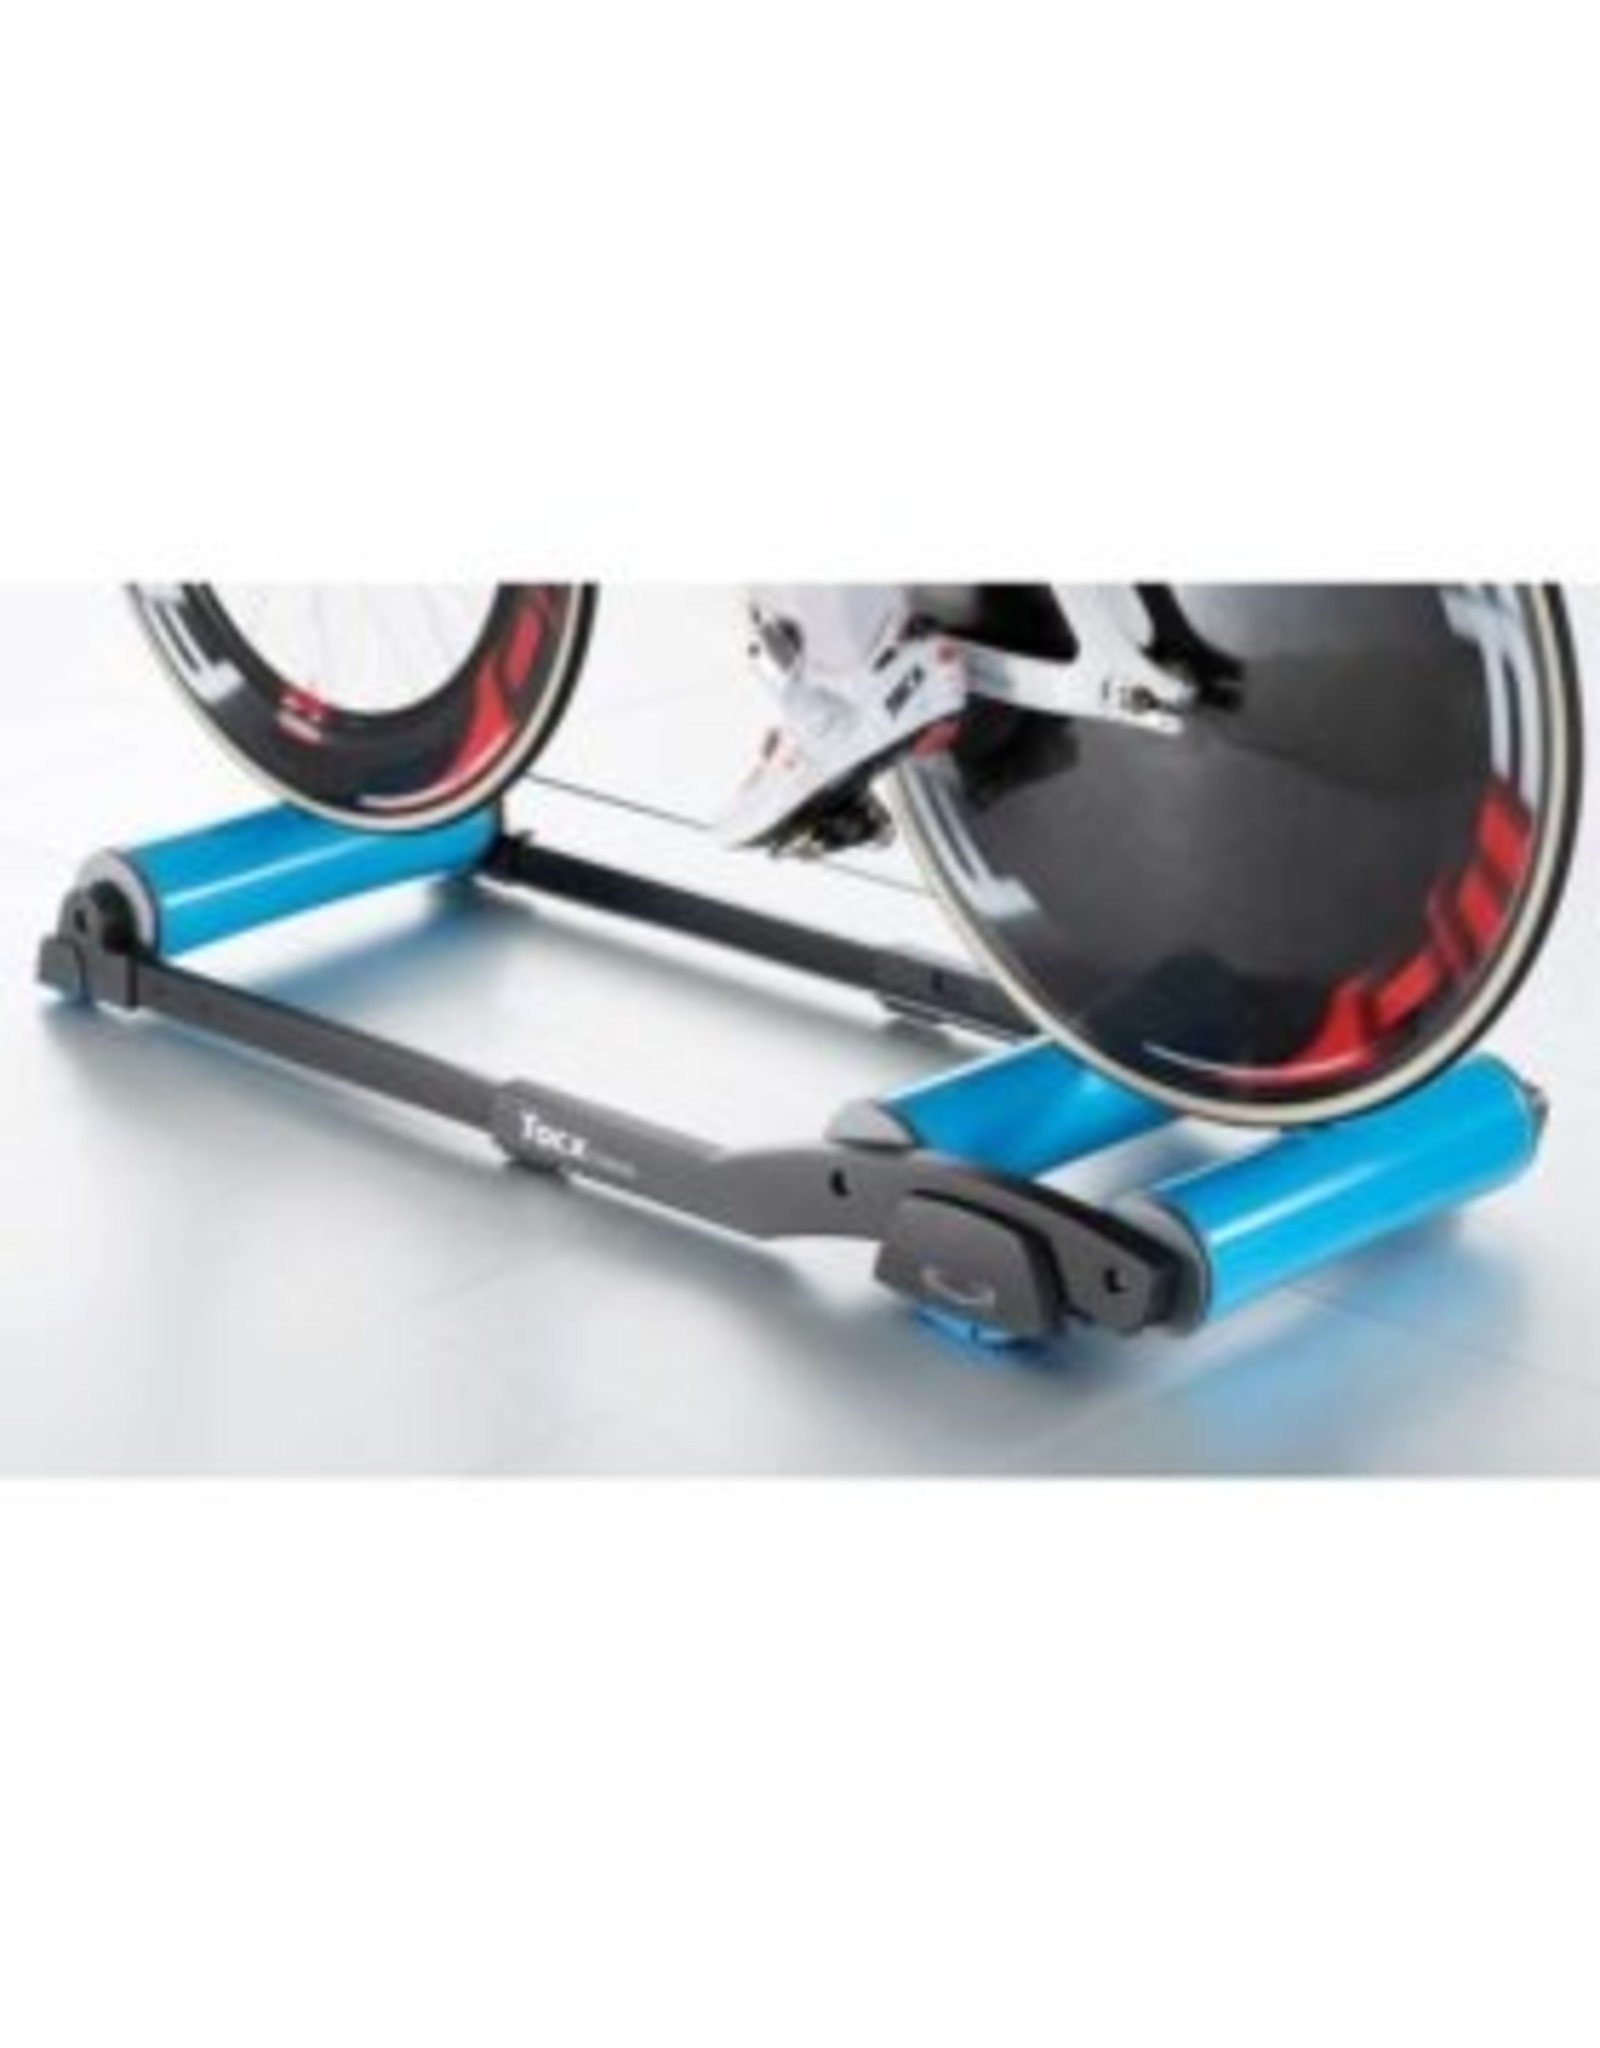 TACX Tacx Galaxia (T-1100) Training Rollers